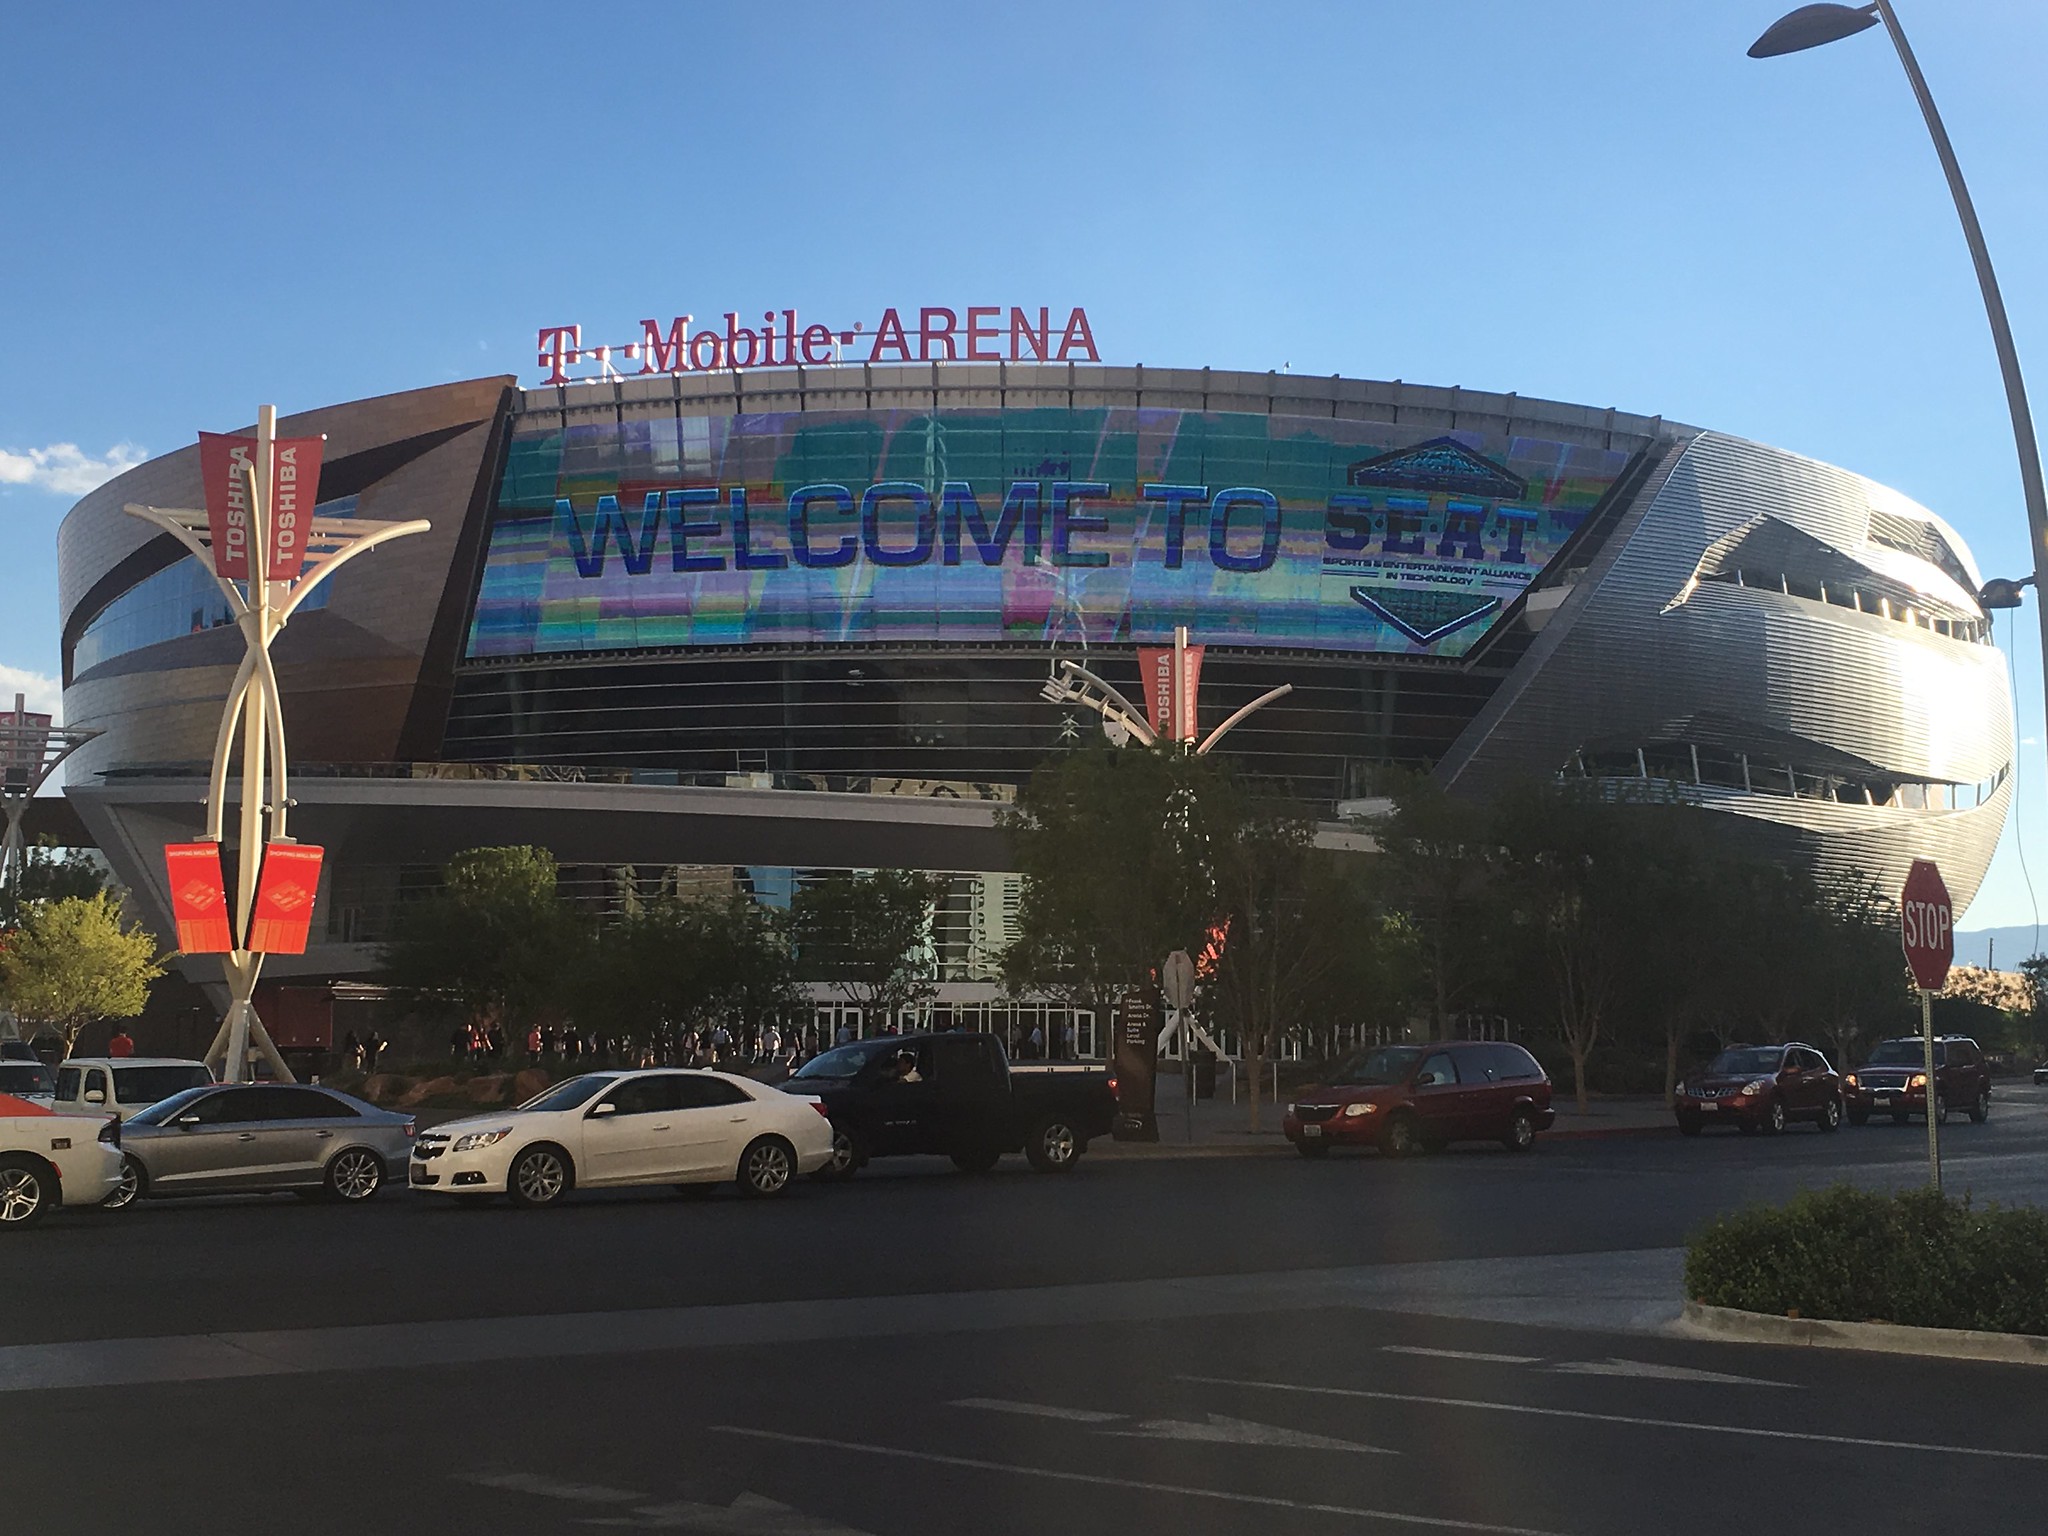 T-Mobile Arena bei Tag mit Autos|T-Mobile Arena bei Tag mit Autos||Jon Jones